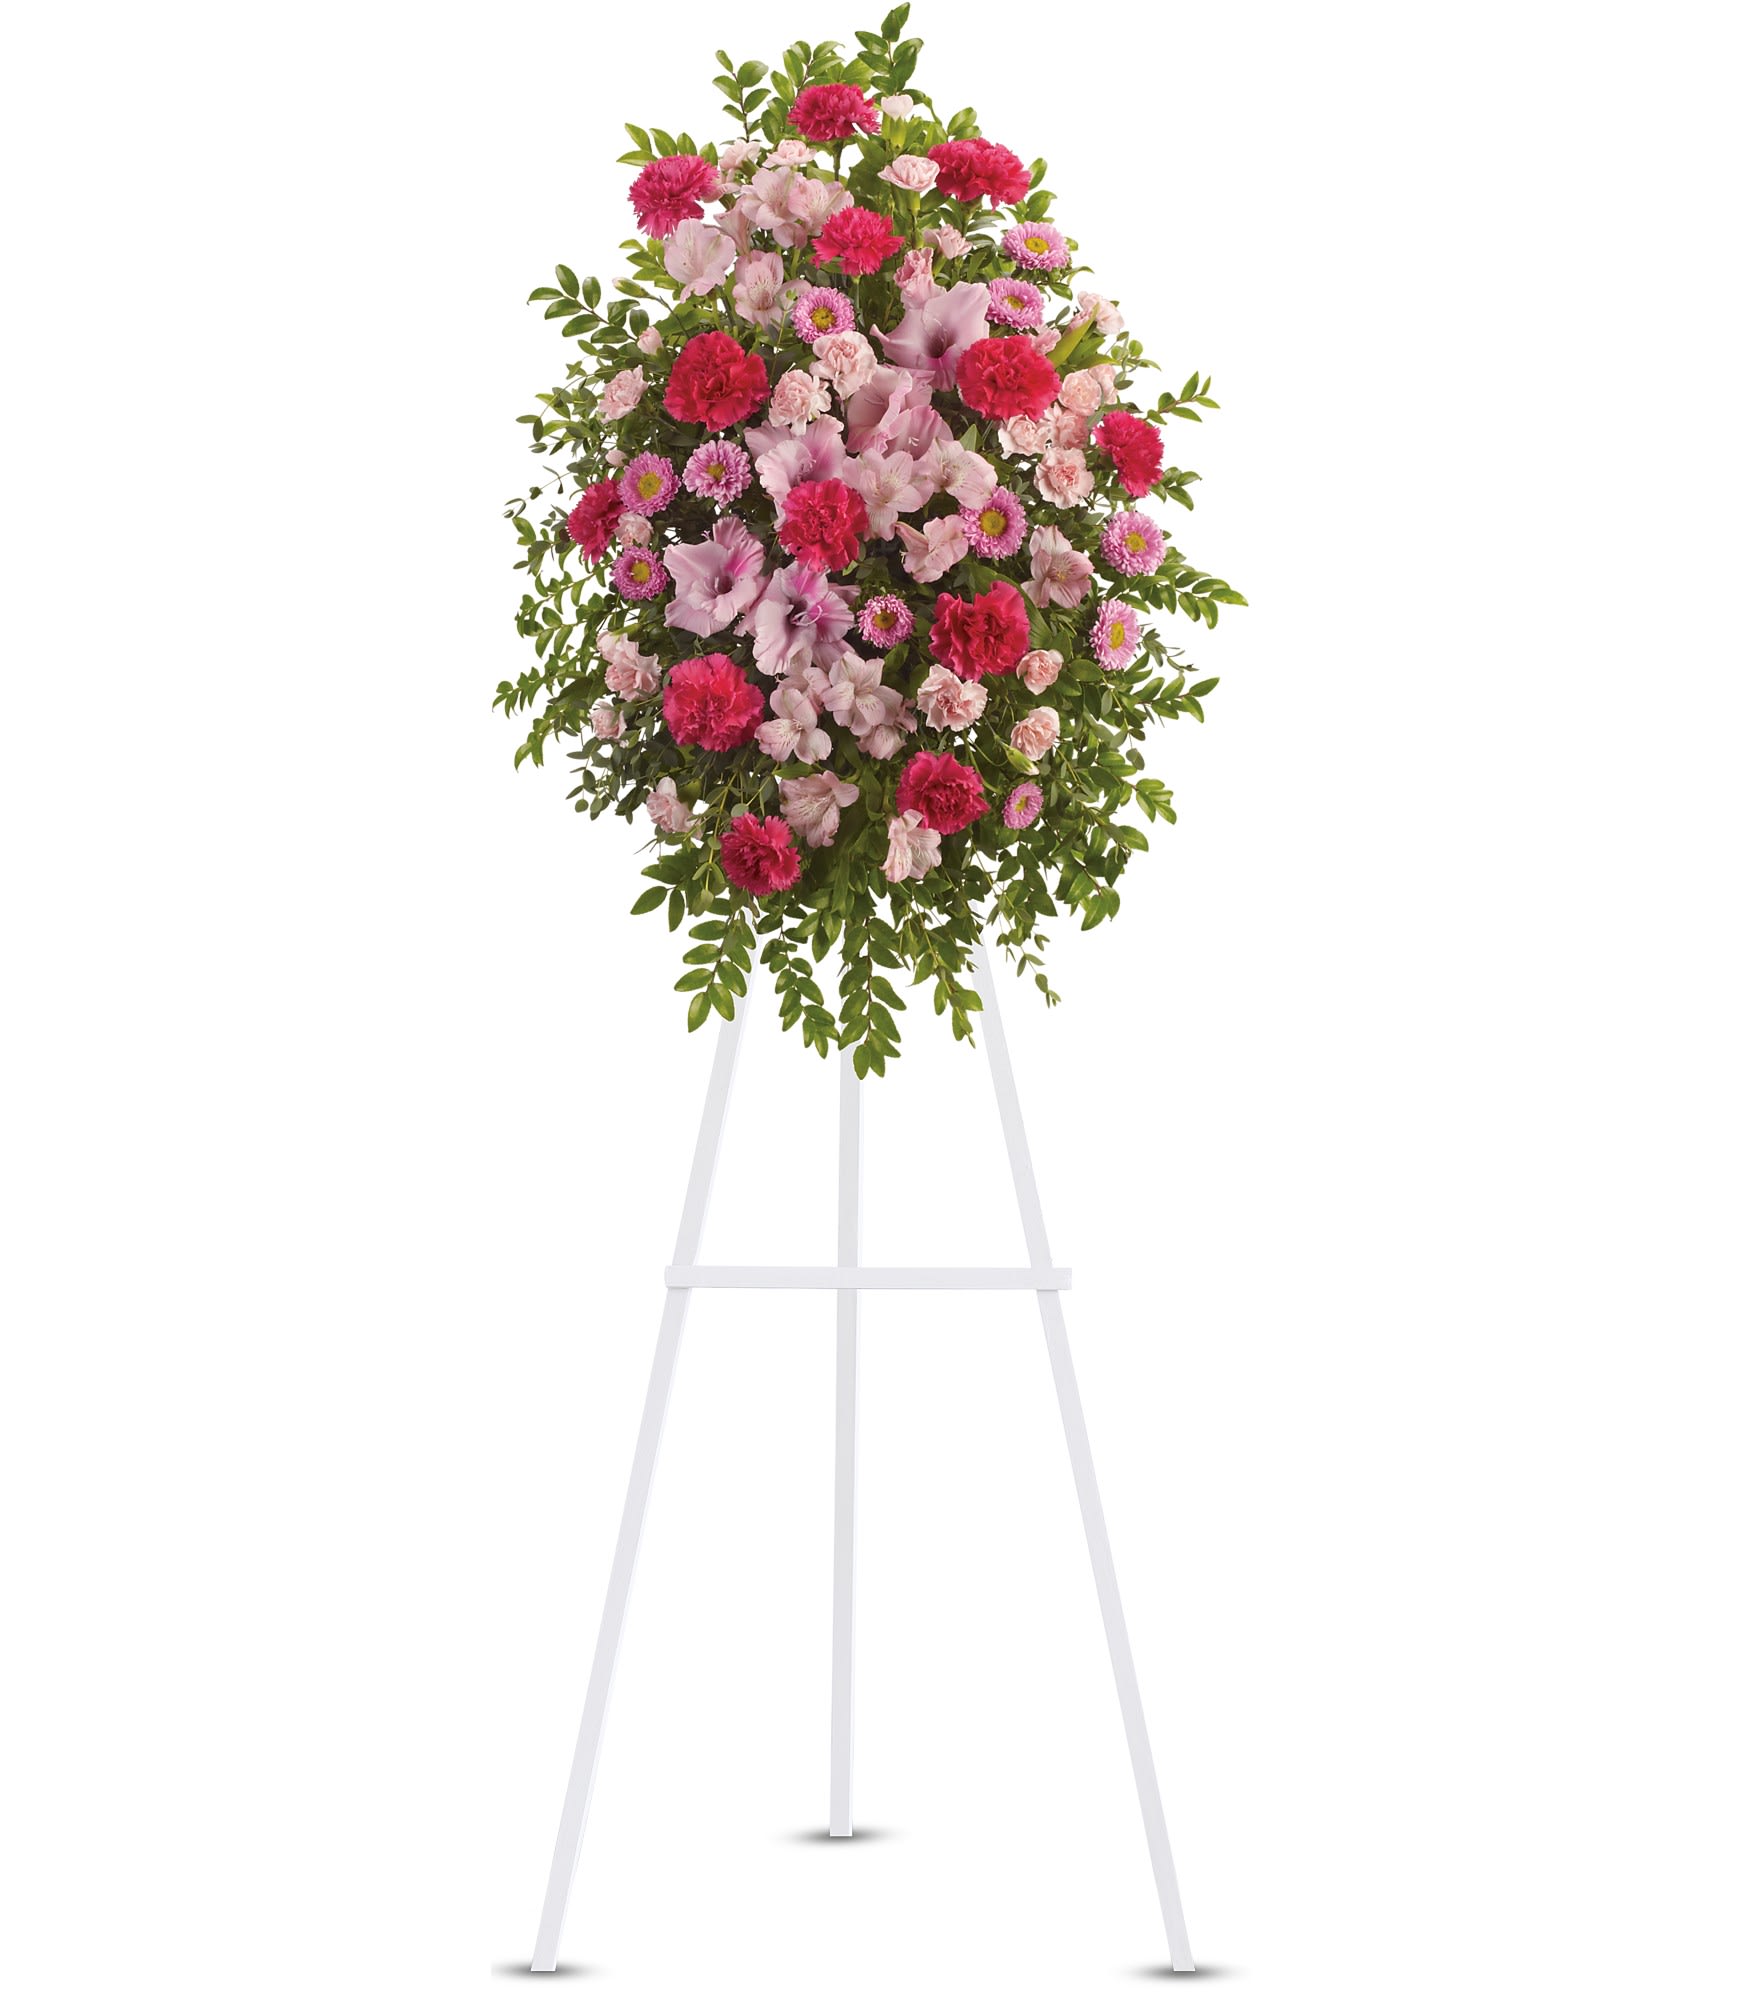 Pink Tribute Spray - With a bounty of lovely pink flowers and simple greens, this pretty spray lets you express your sympathy beautifully. 